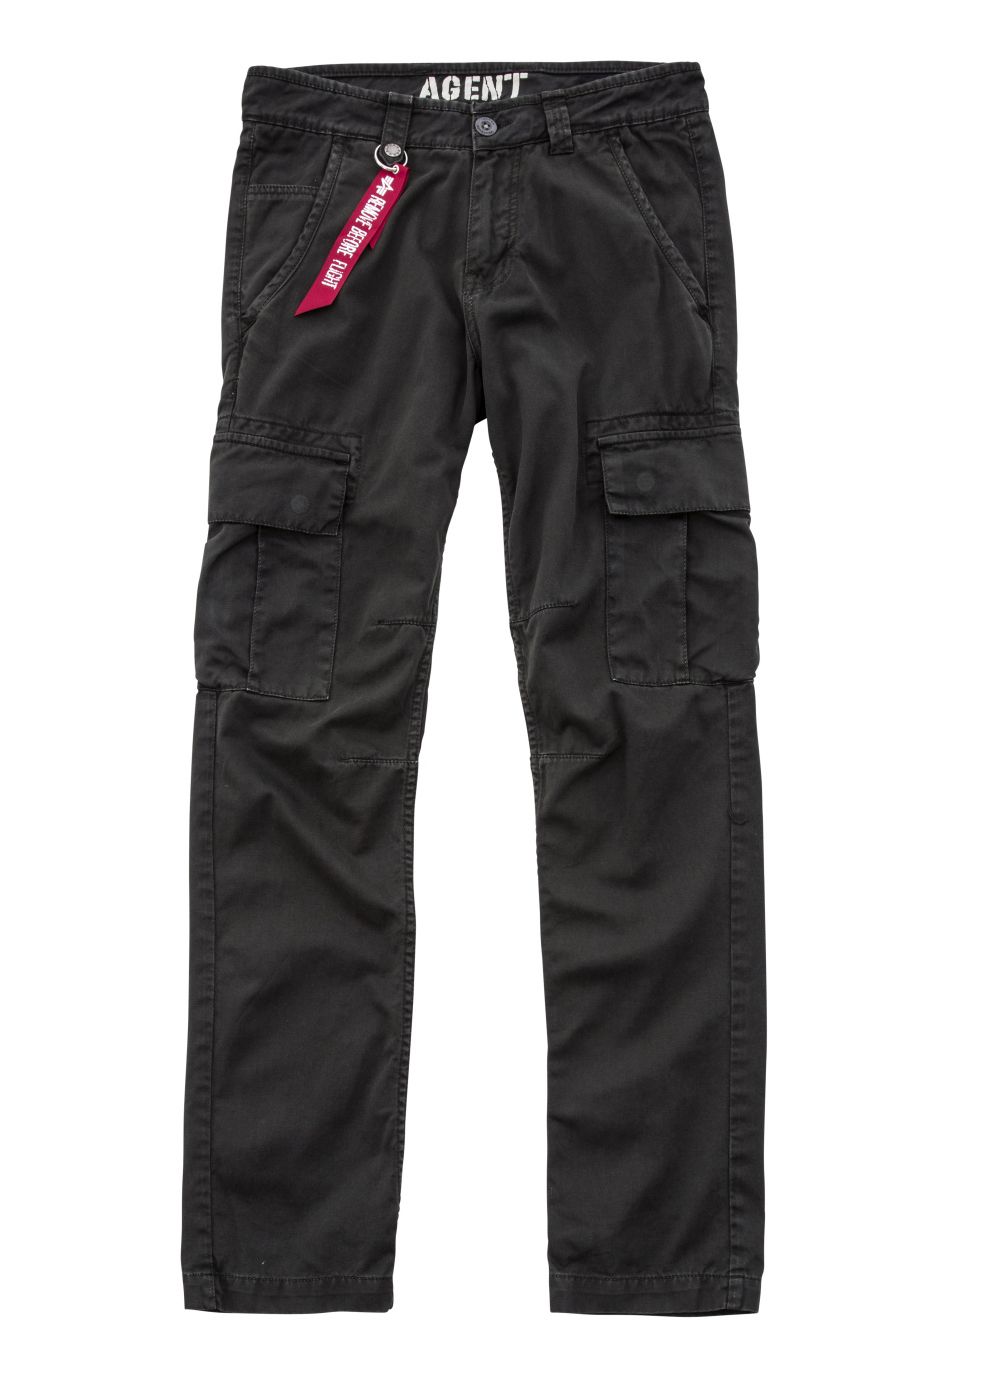 Alpha Industries Agent Pant (greyblack)